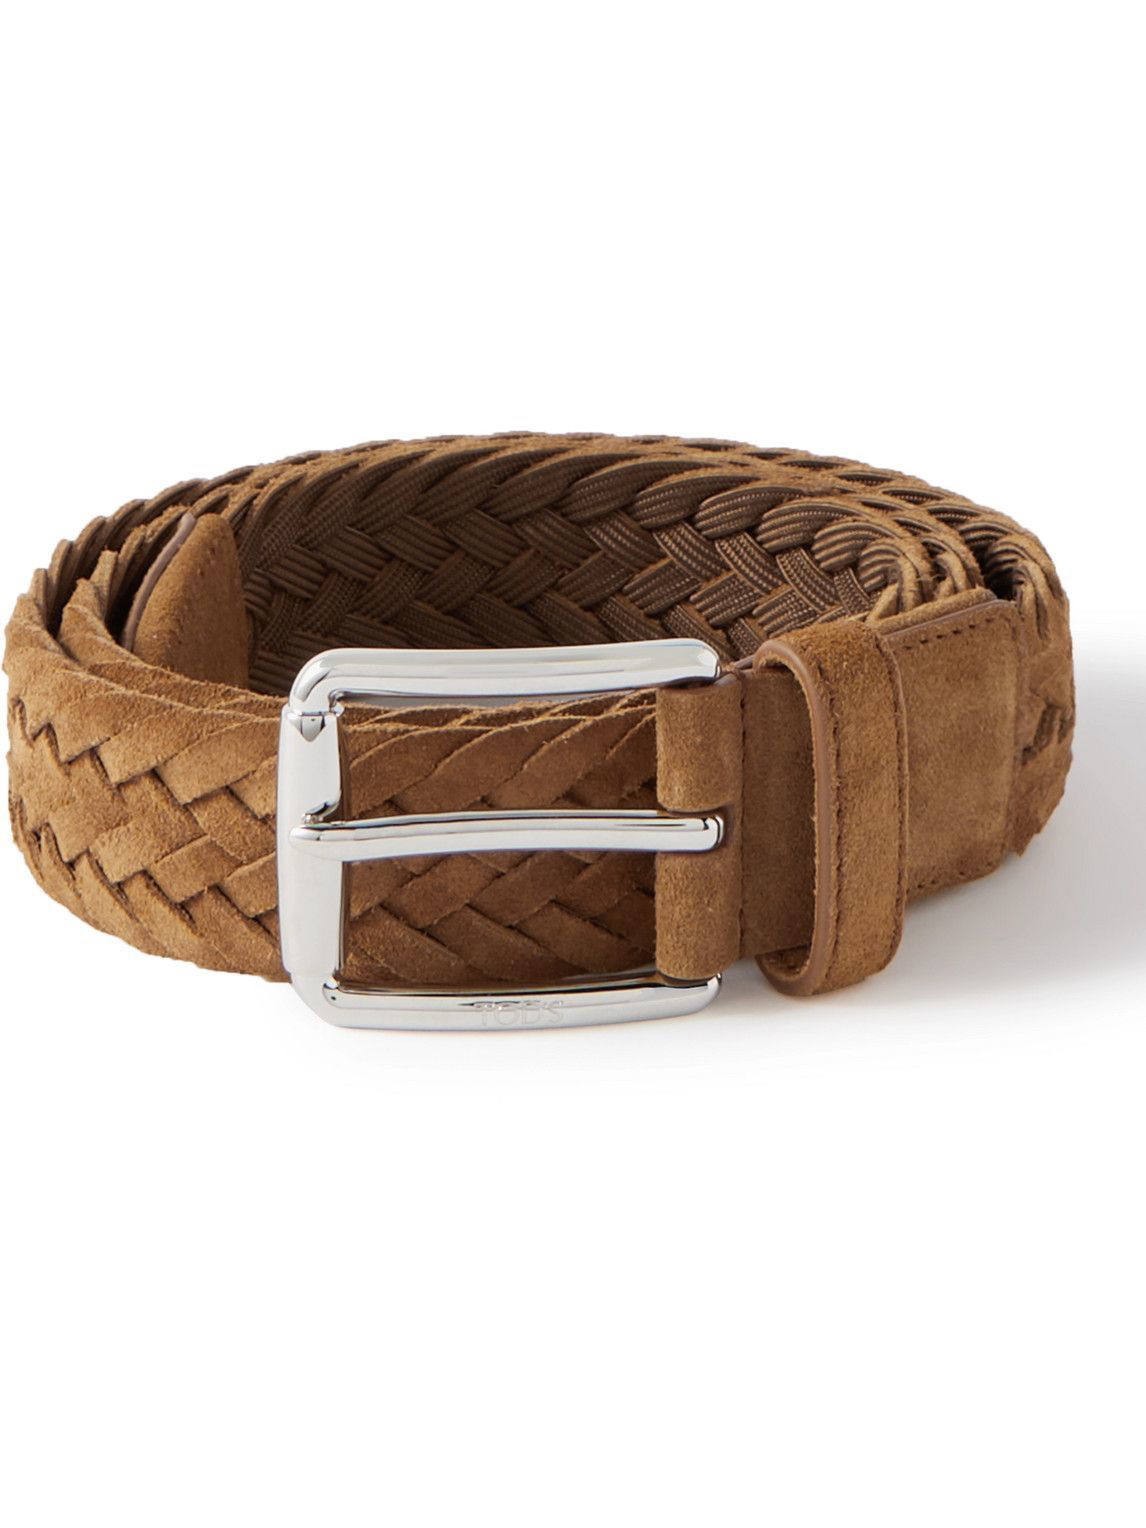 Buy Tod's Suede Belt with Tang Clasp, Brown Color Men